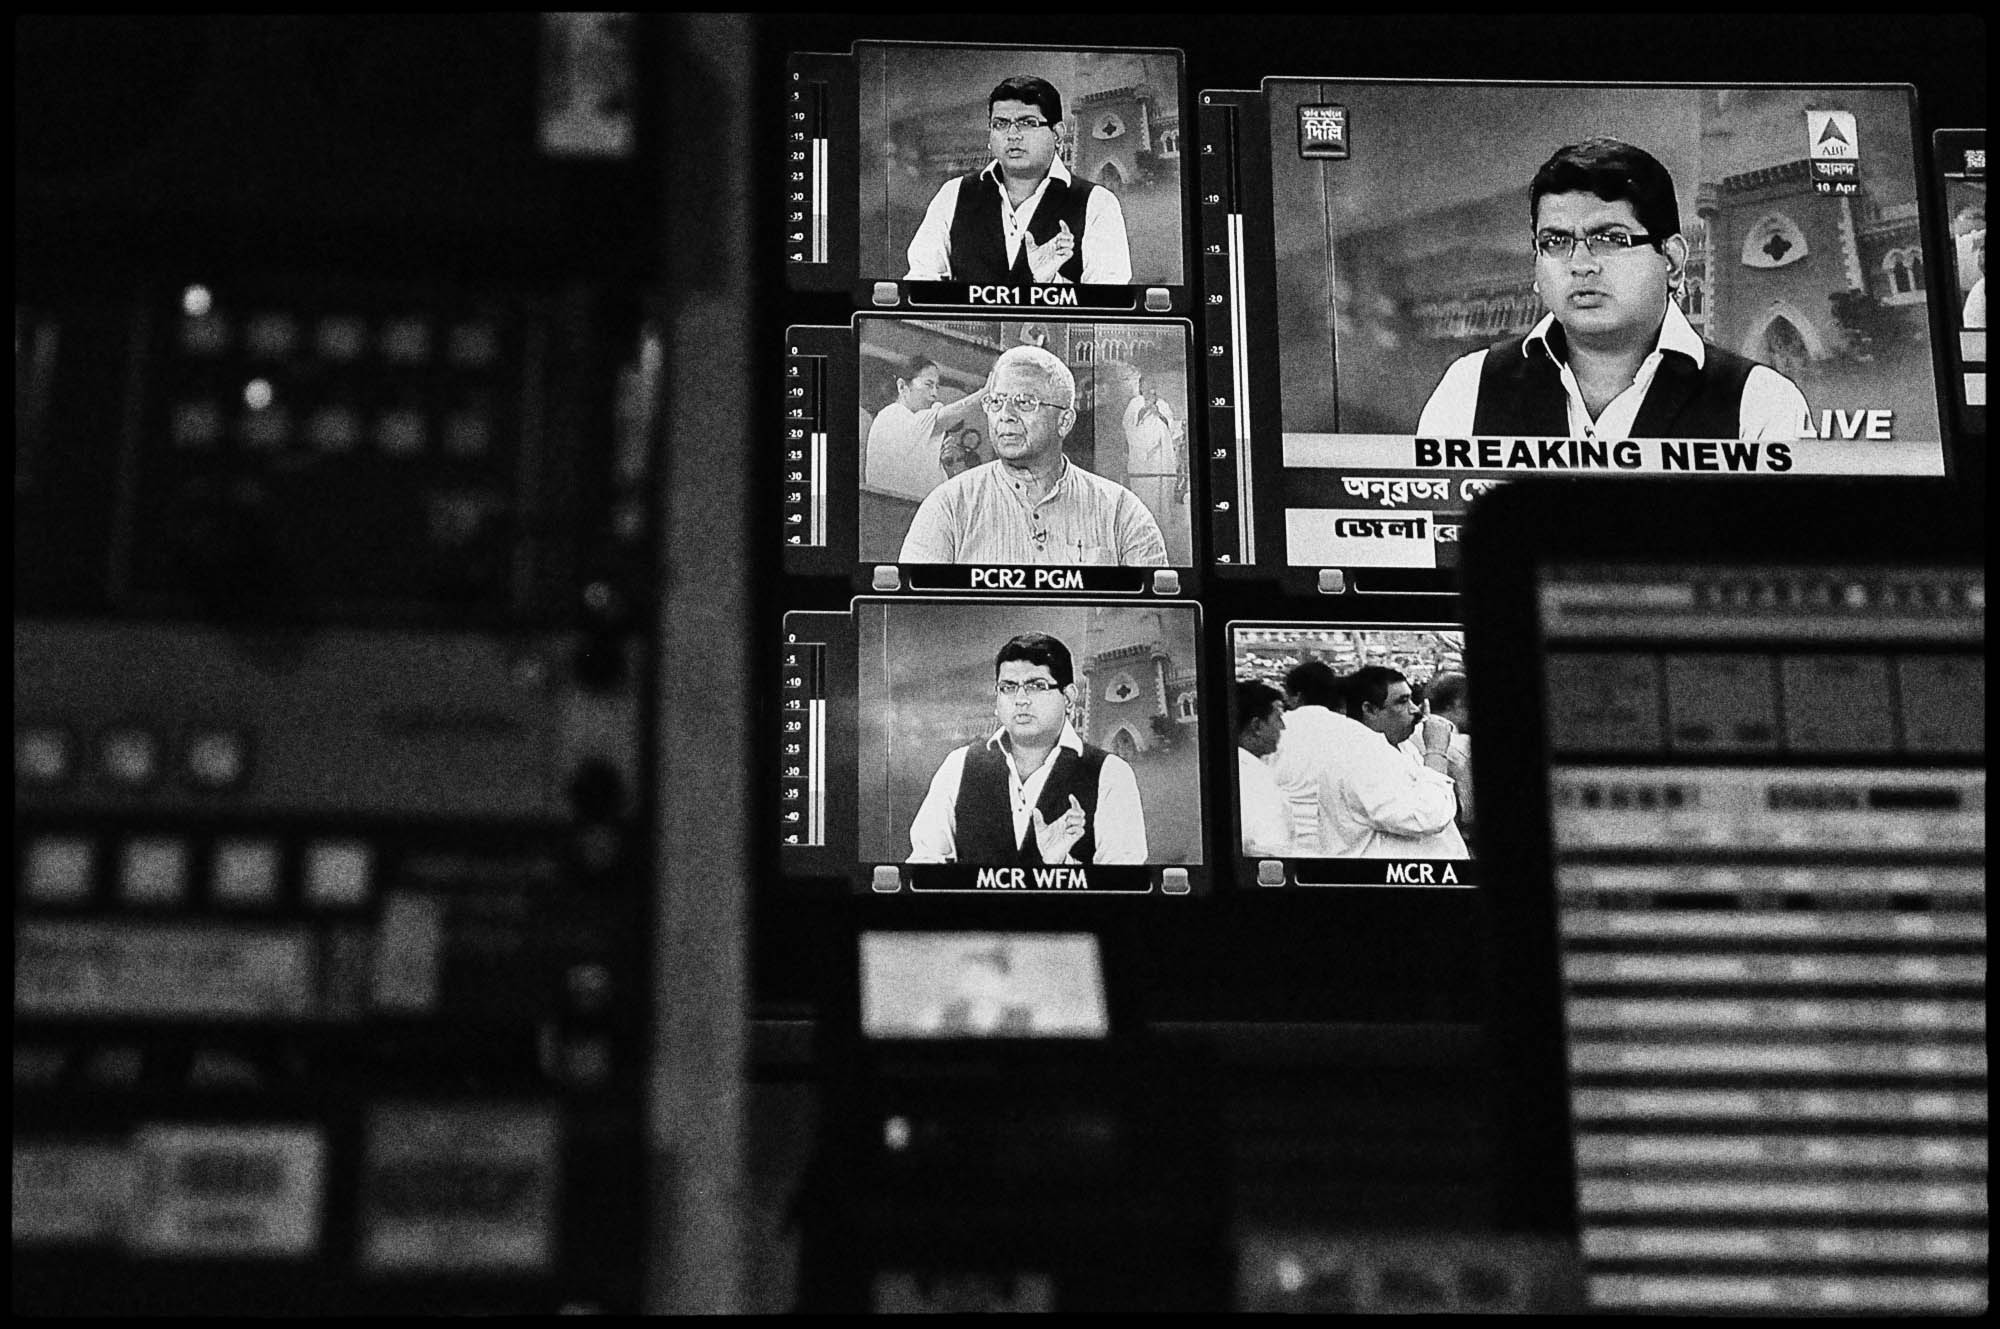 A series of televisions inside a television news channel in Kolkata